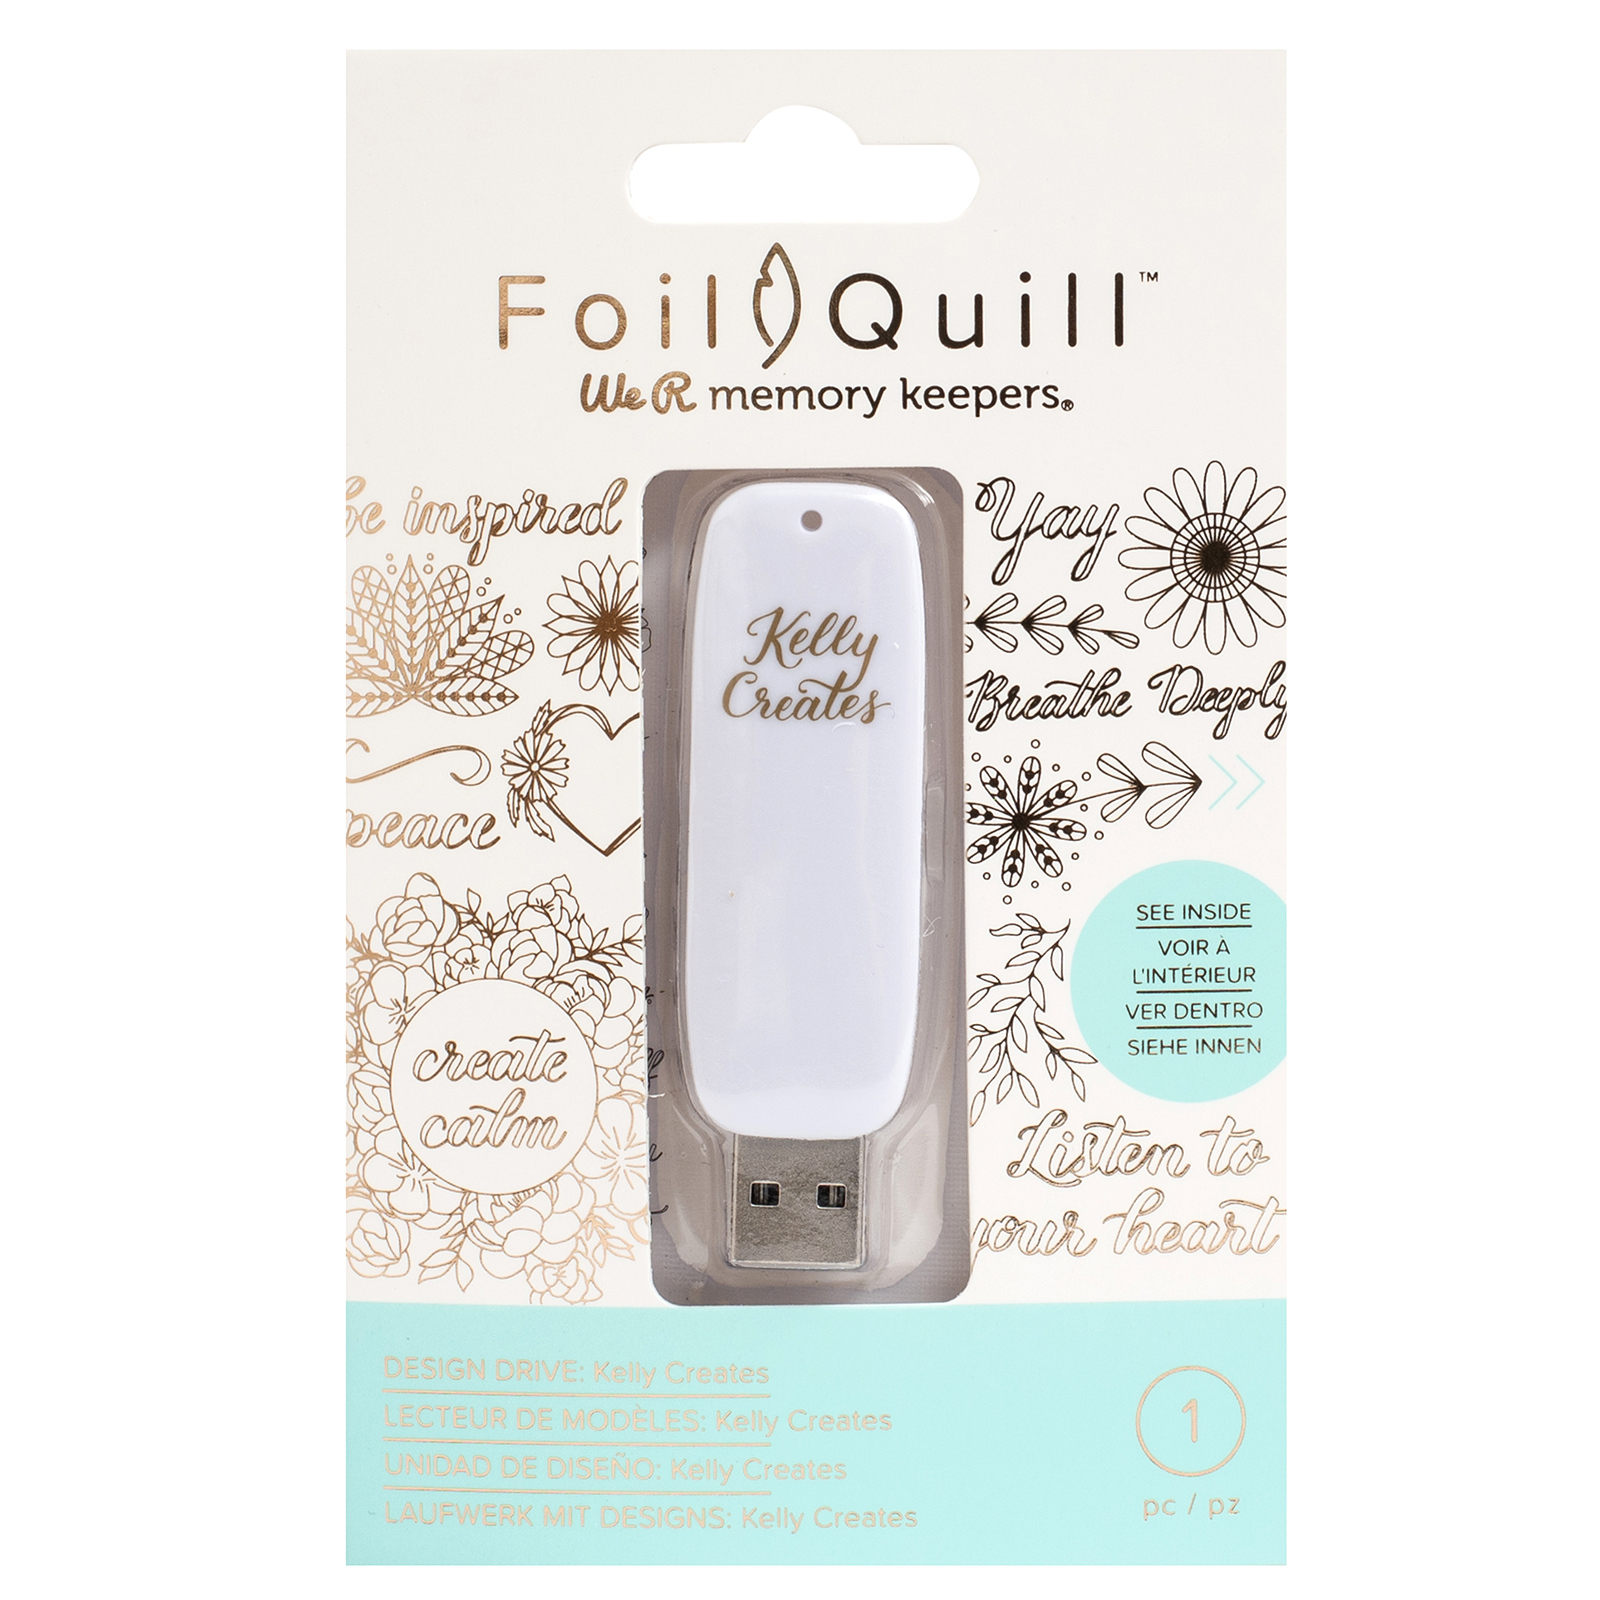 Kelly Create - USB Stick - Foil Quill